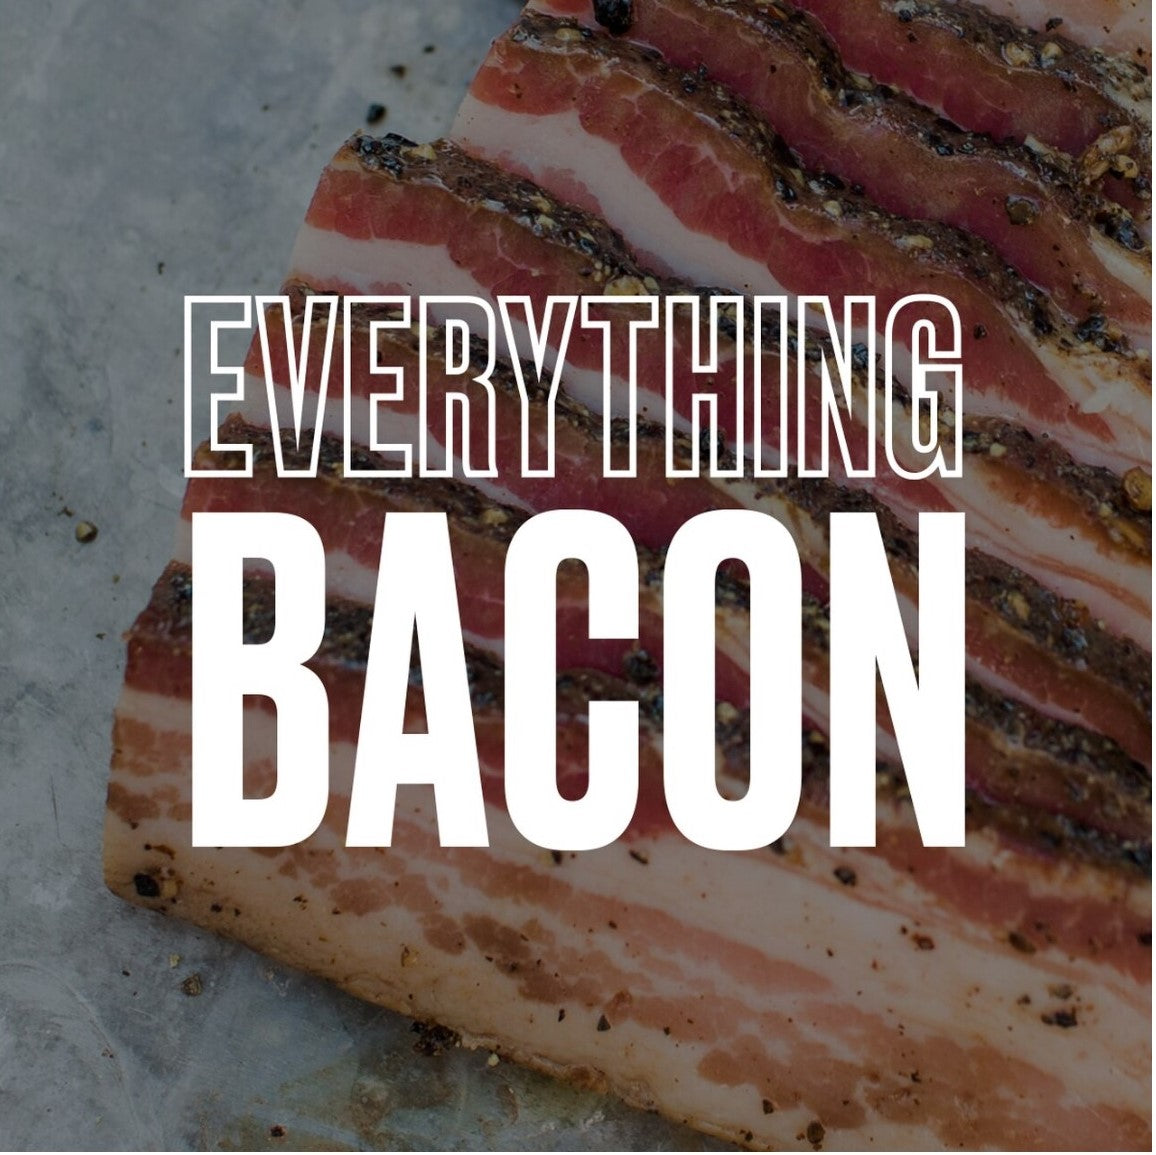 MeatCrafters' Everything Bacon